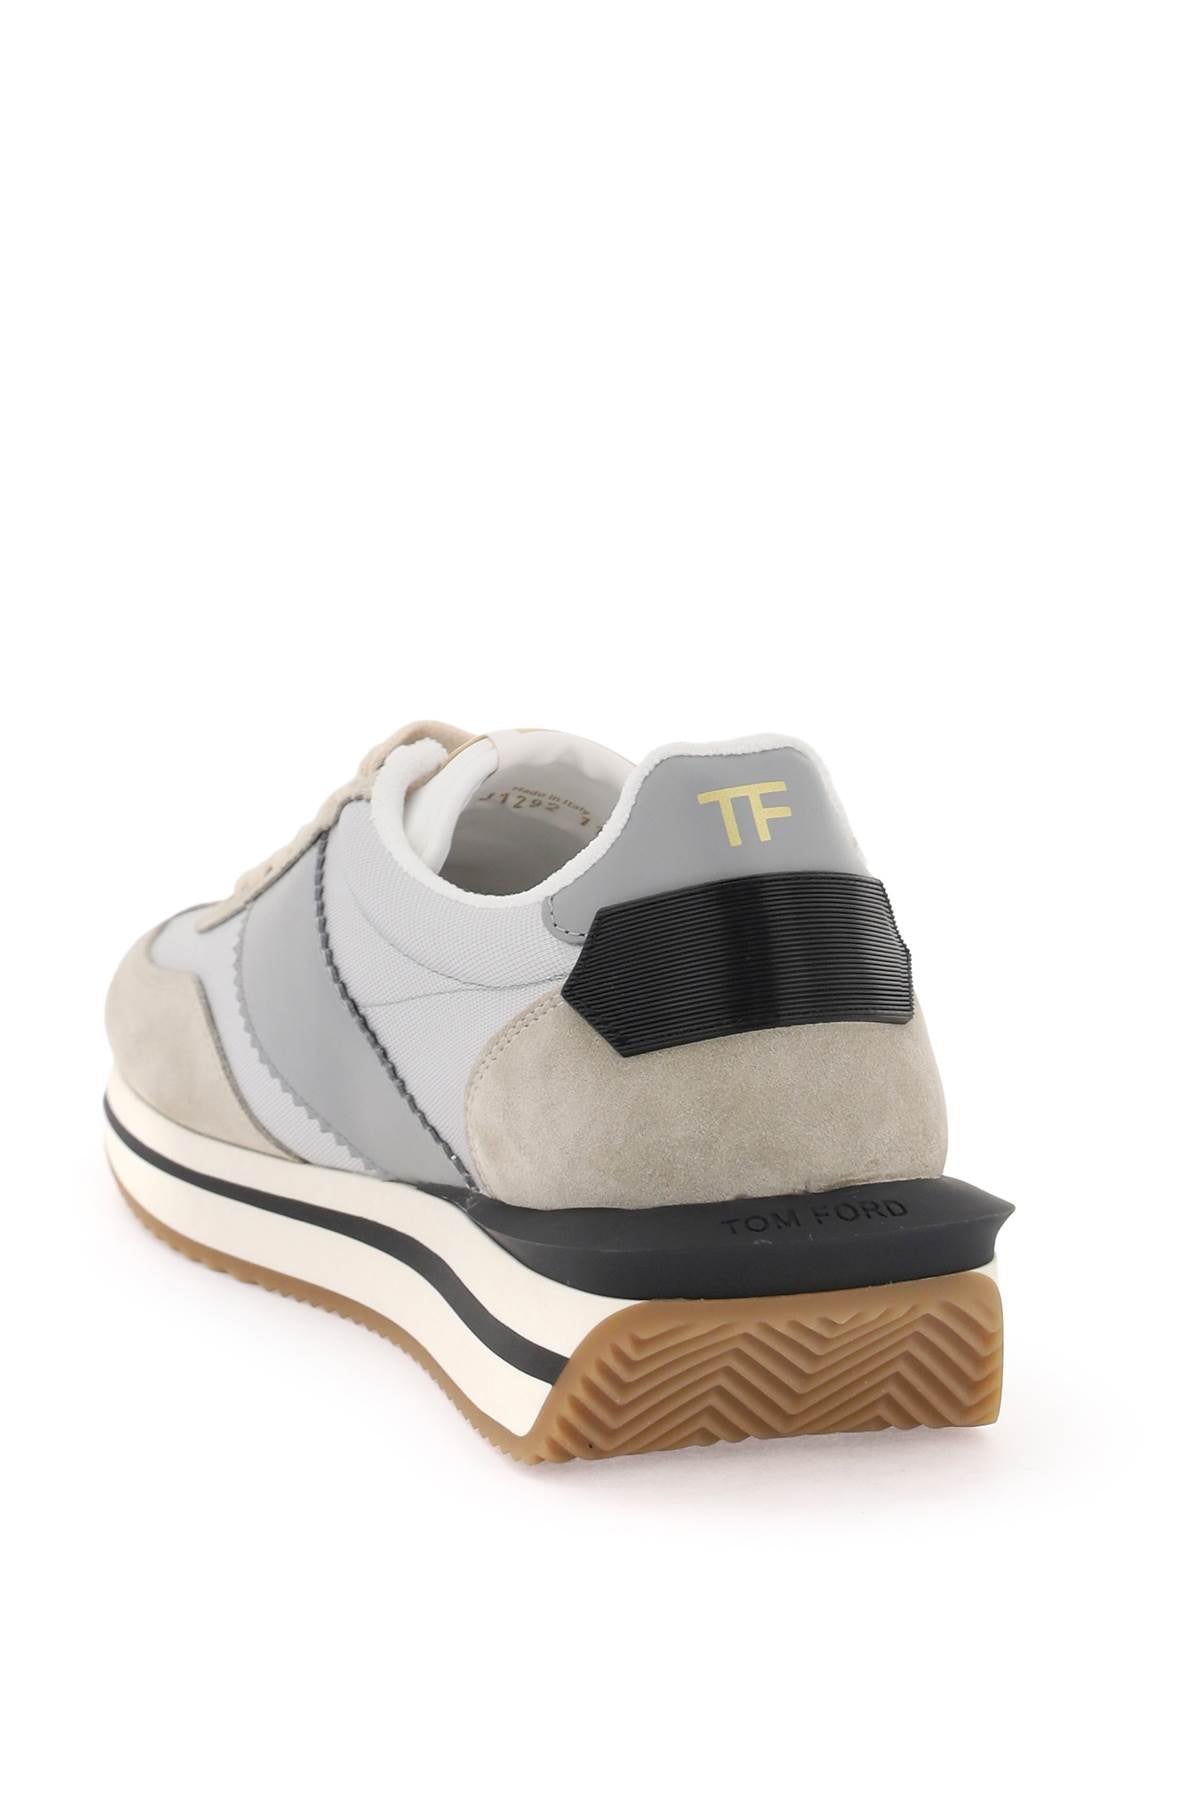 Tom ford james sneakers in lycra and suede leather-2